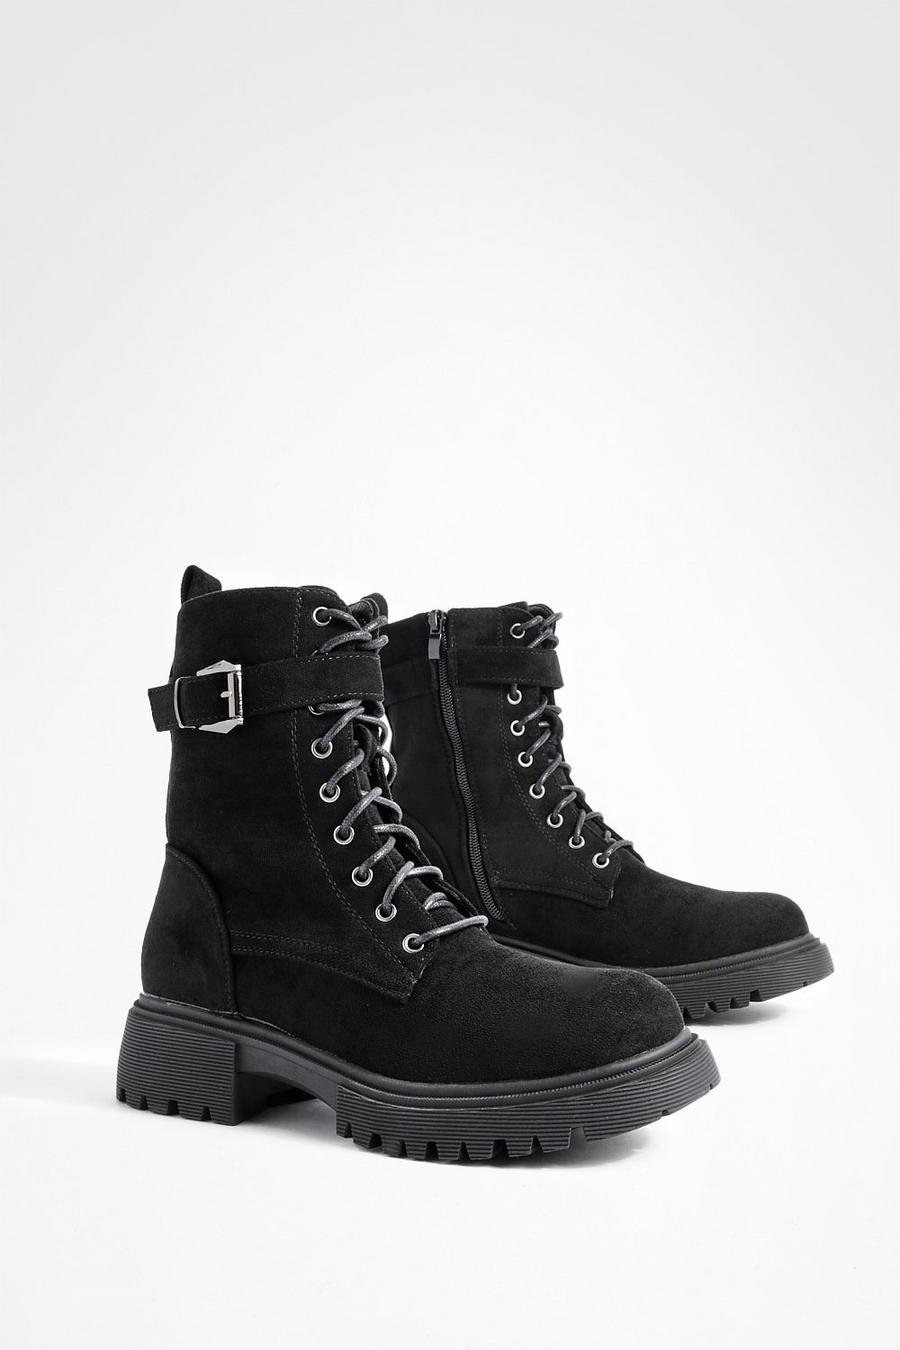 Black Buckle Chunky Combat Boots